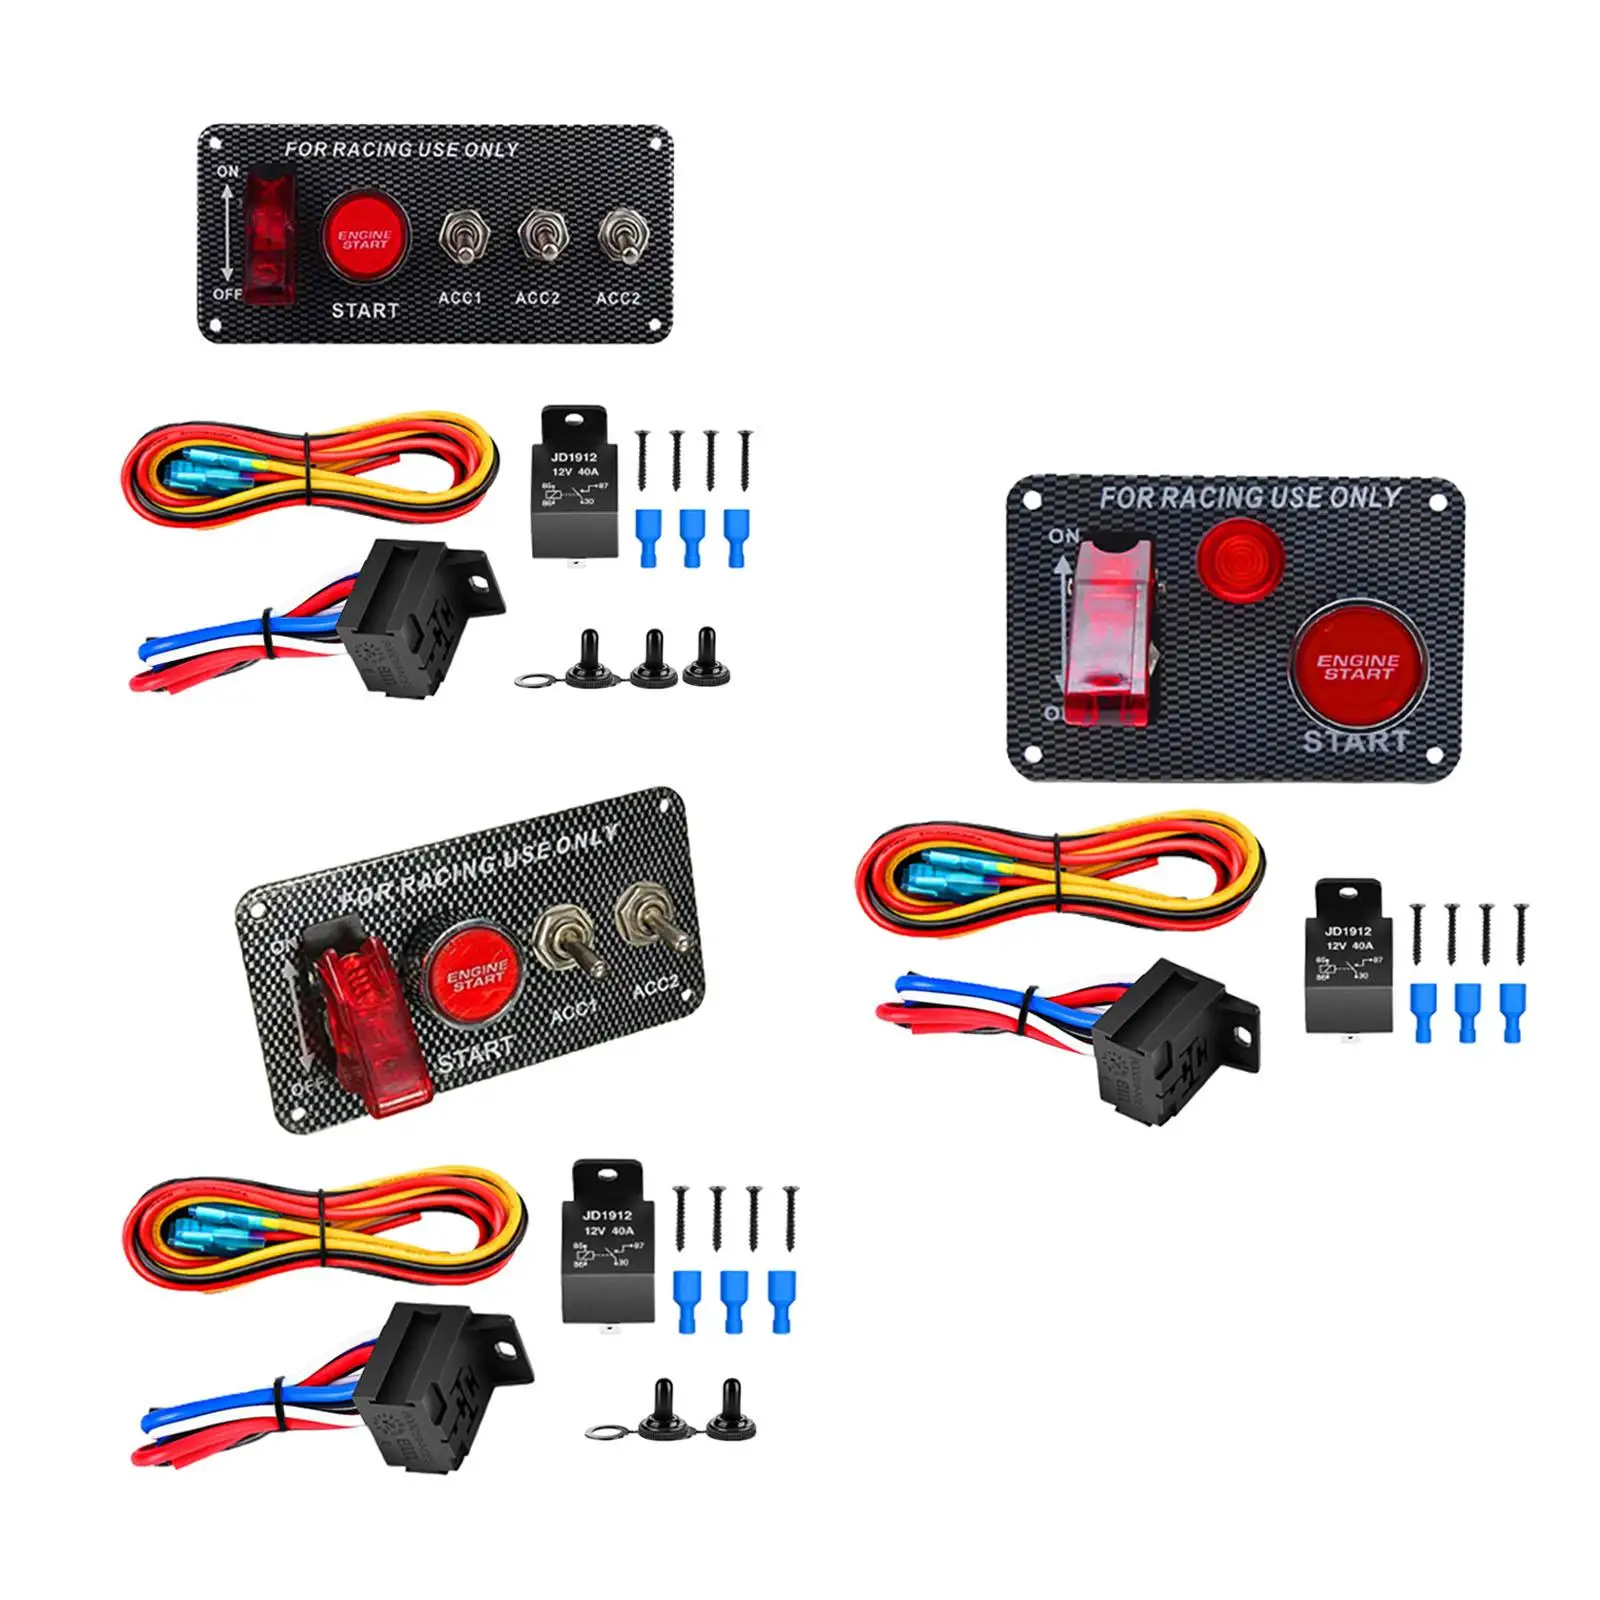 12V Ignition Switch Panel Replacements for 12V Racing Vehicle Yachts